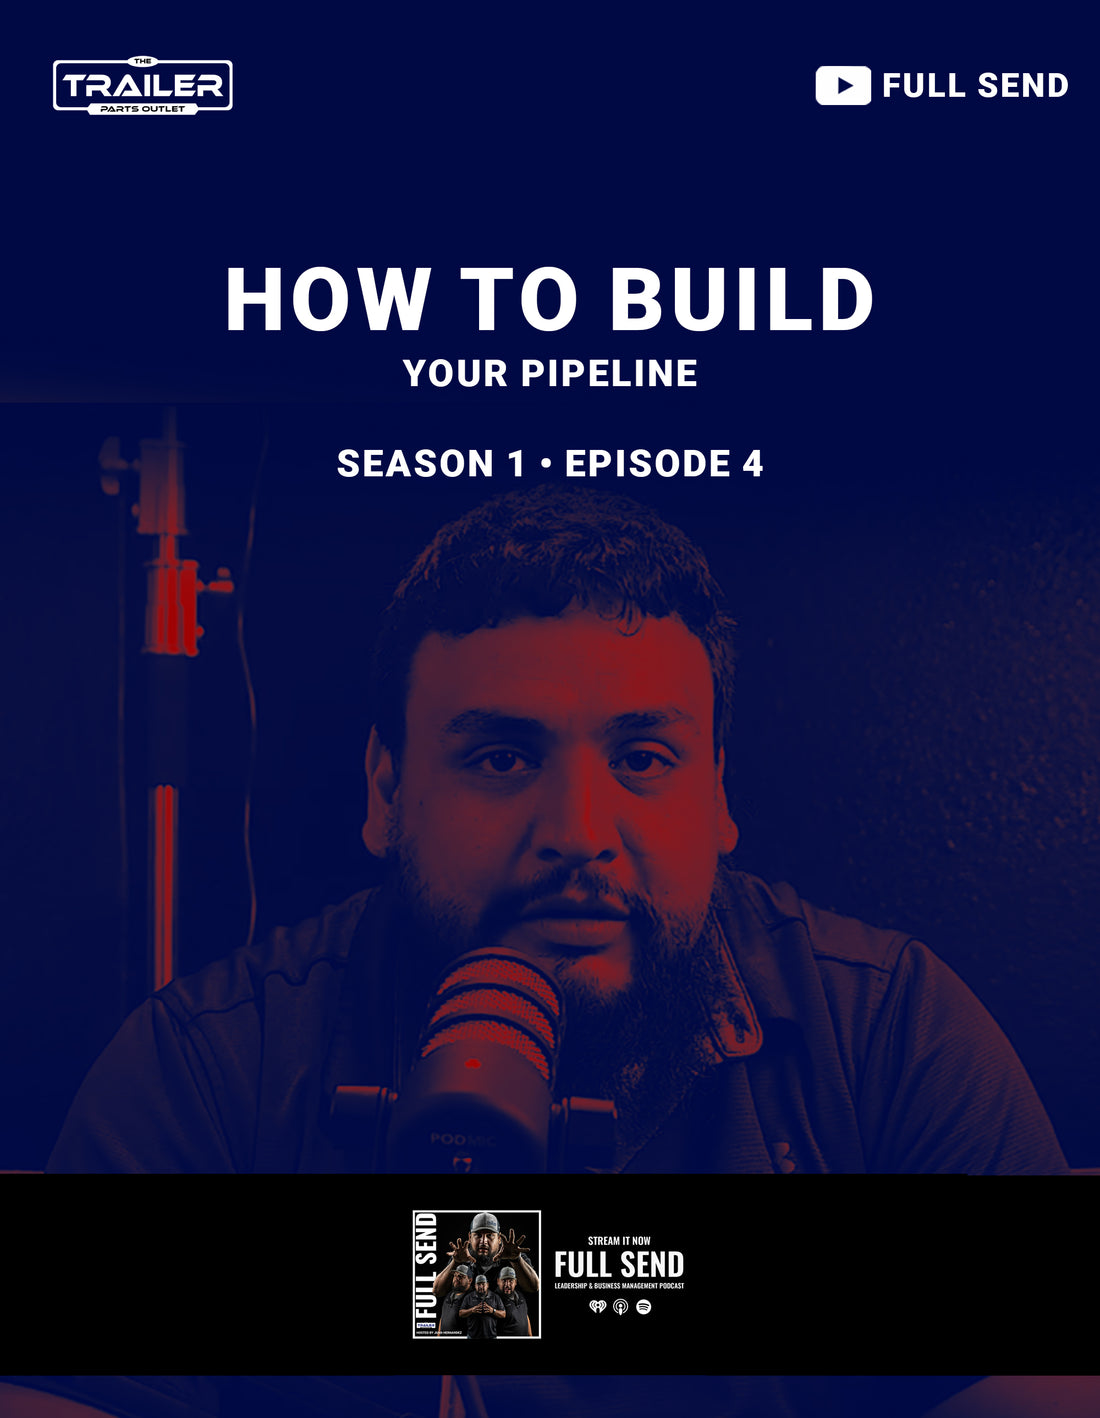 How To Build Your Pipeline and get more sales!